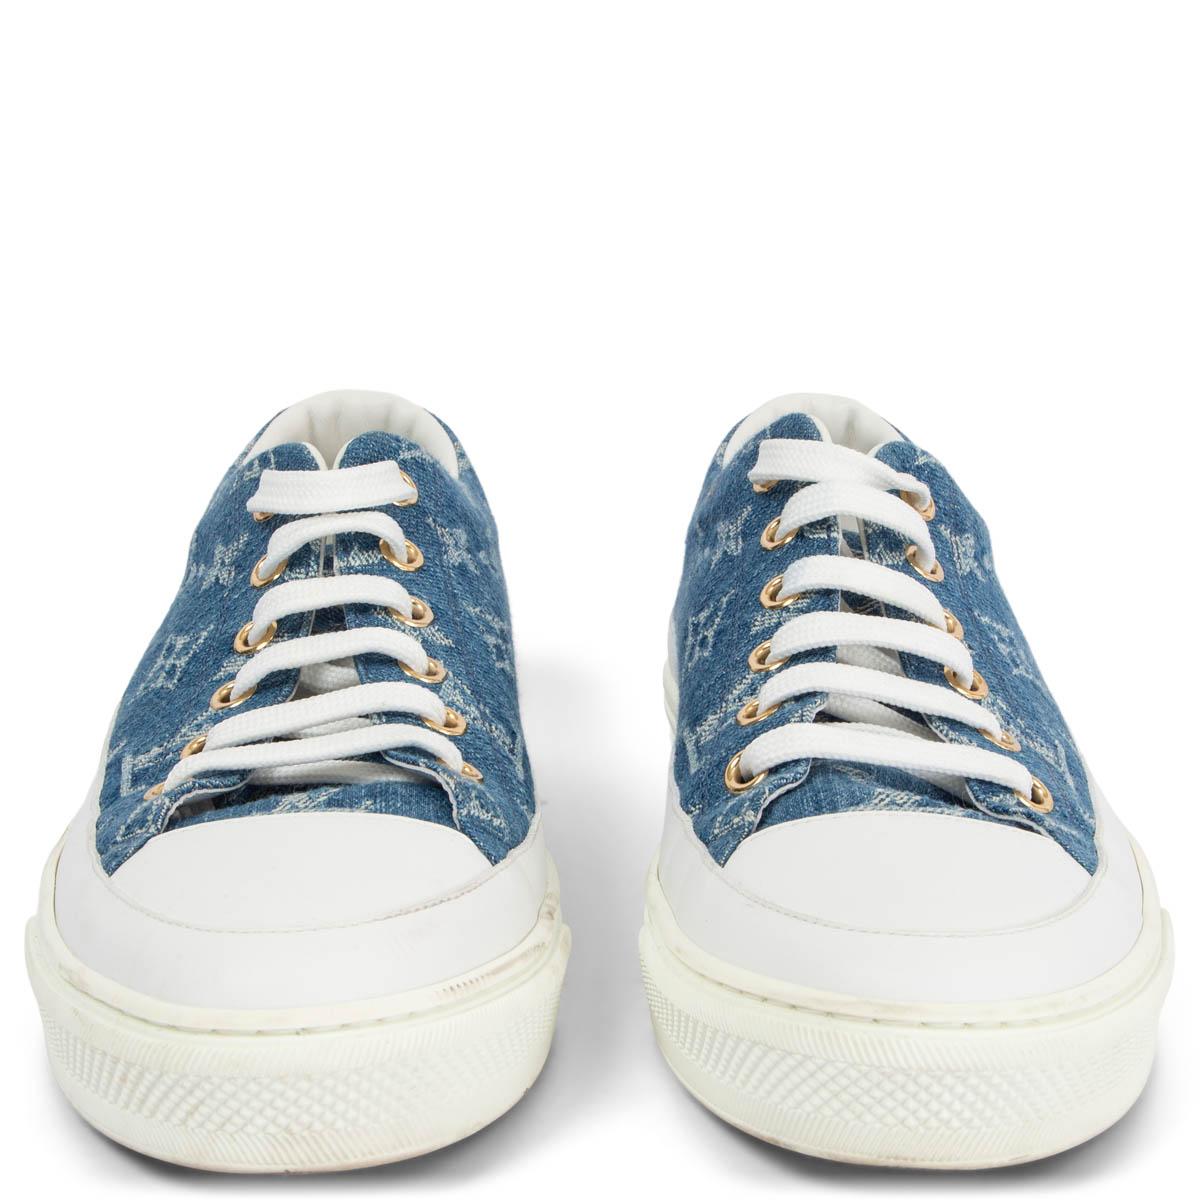 100% authentic Louis Vuitton 2019 Stellar low-top sneakers in Monogram denim with white leather trimming and tip set on white rubber soles. Have been worn and are in excellent condition. 

Measurements
Imprinted Size	37.5
Shoe Size	37.5
Inside